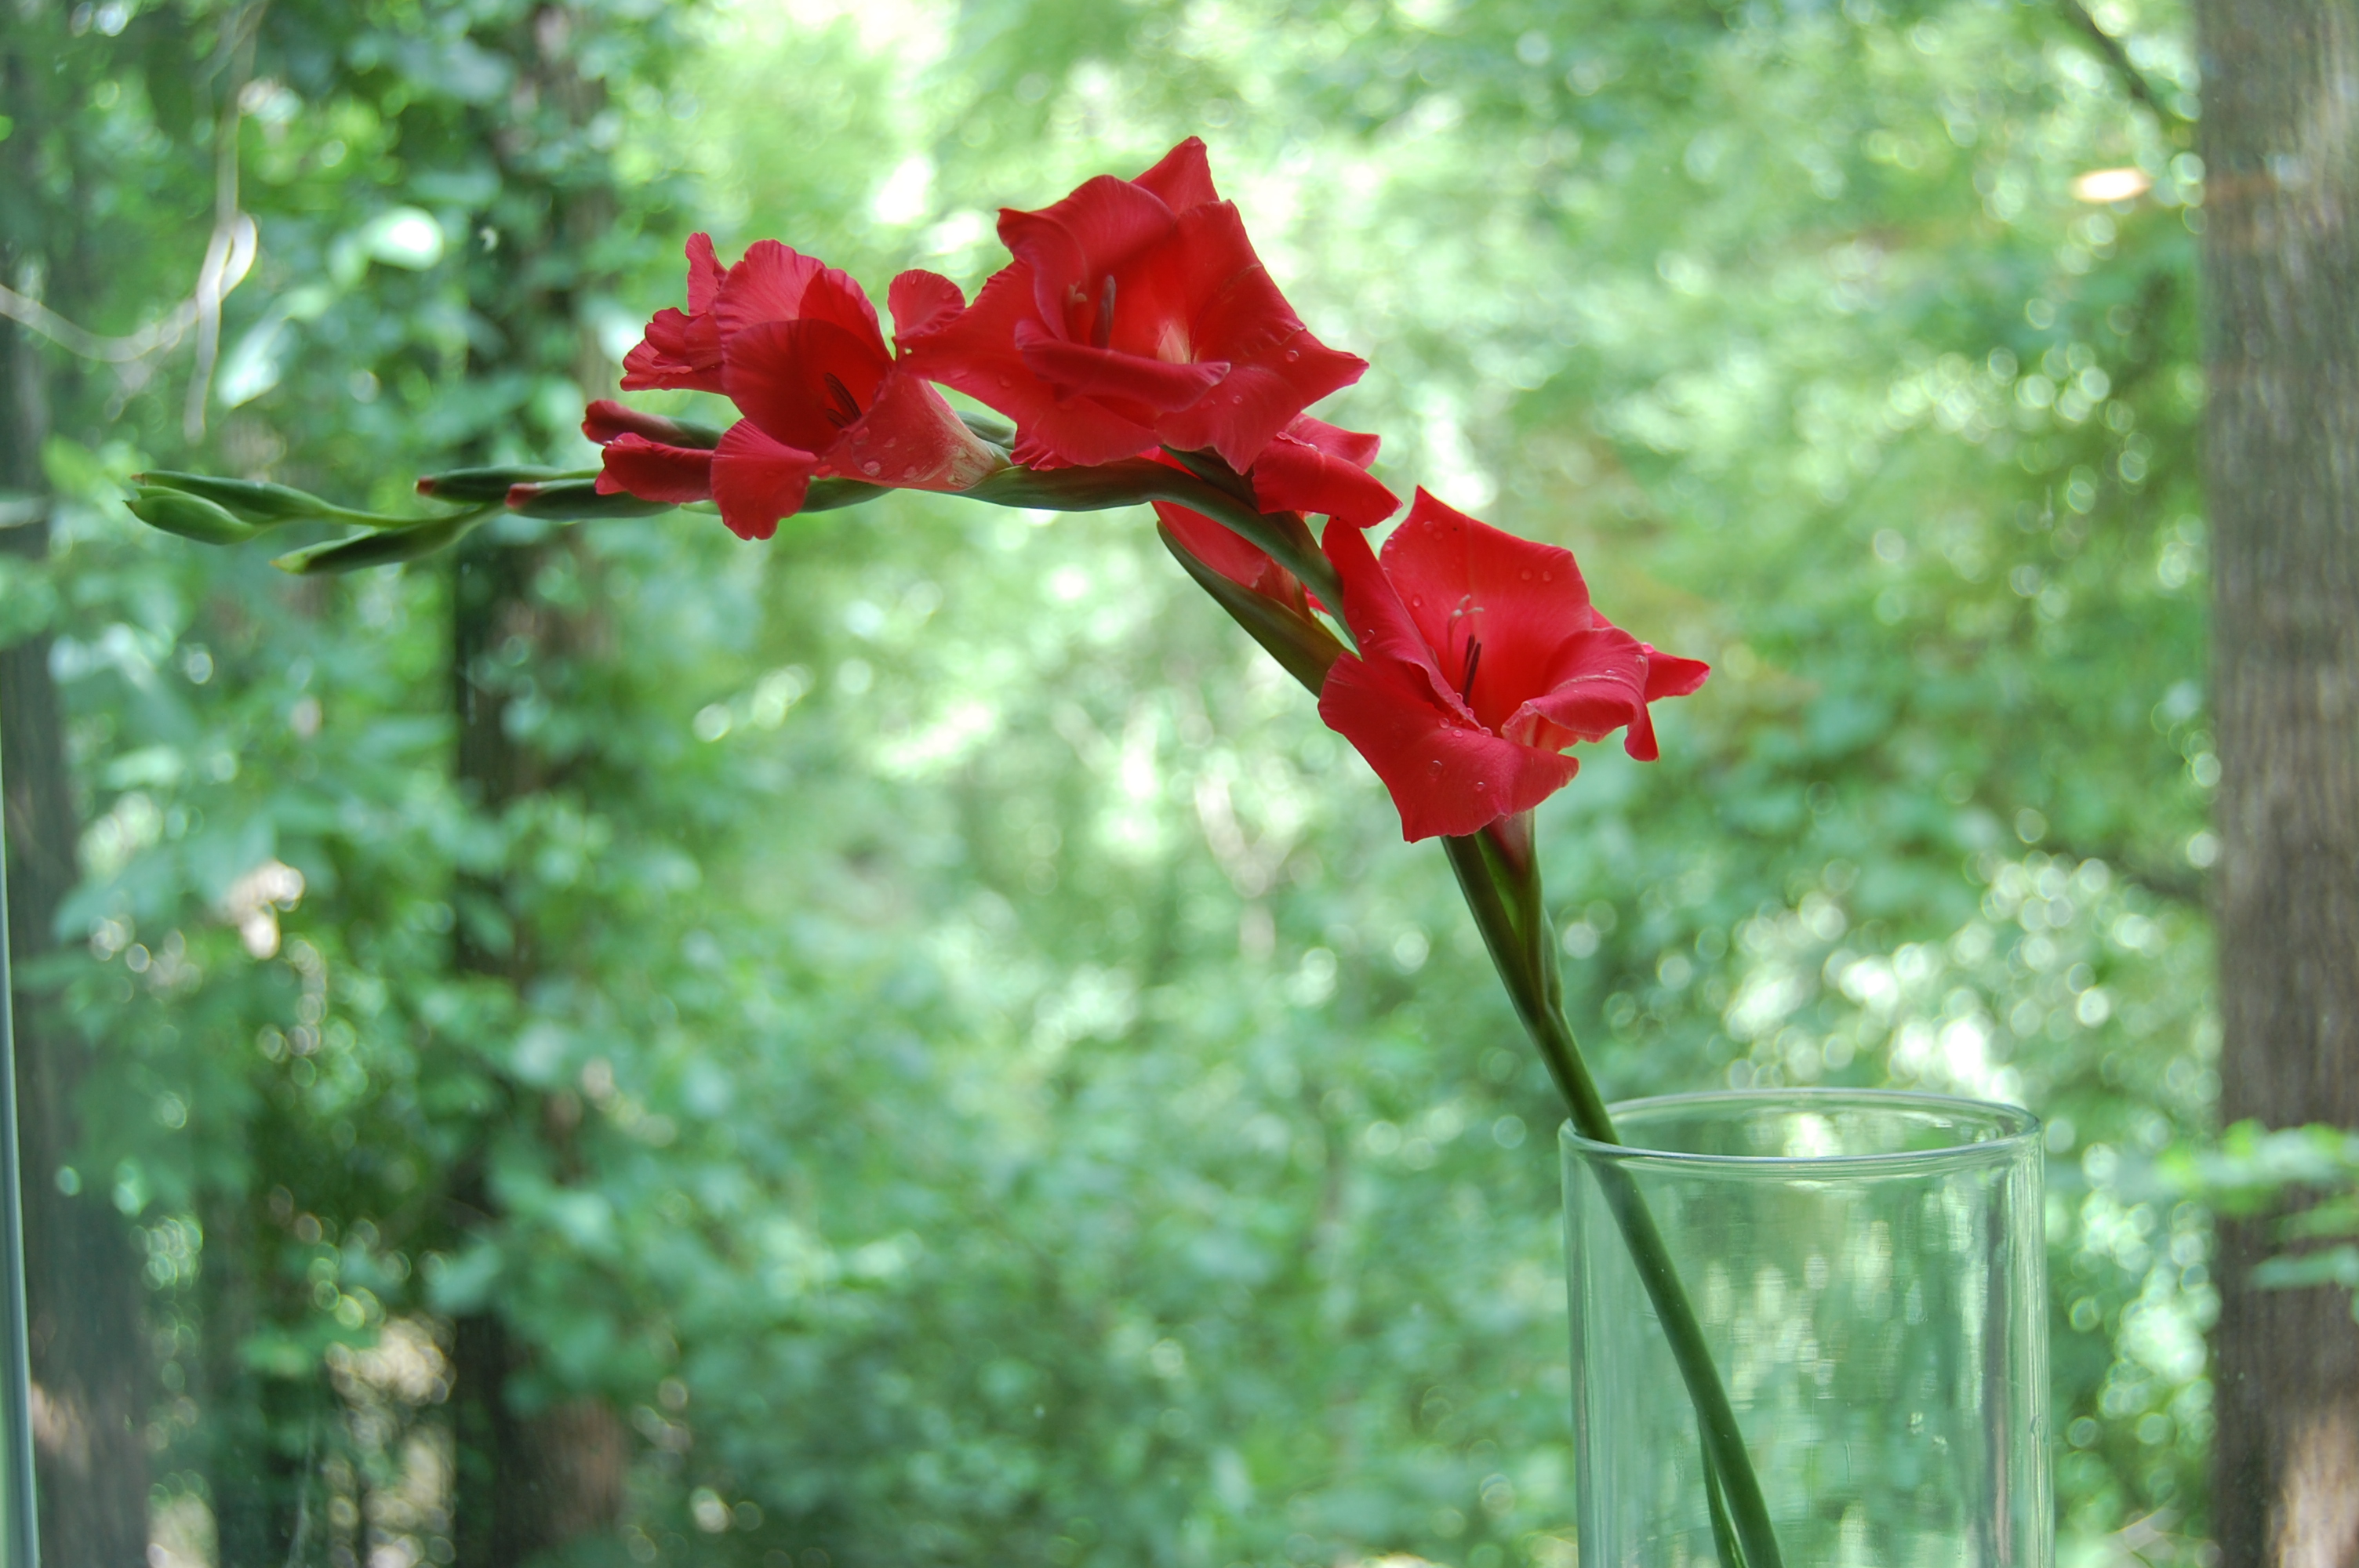 The Gladiolus Project - Red Gladiolus from the Garden